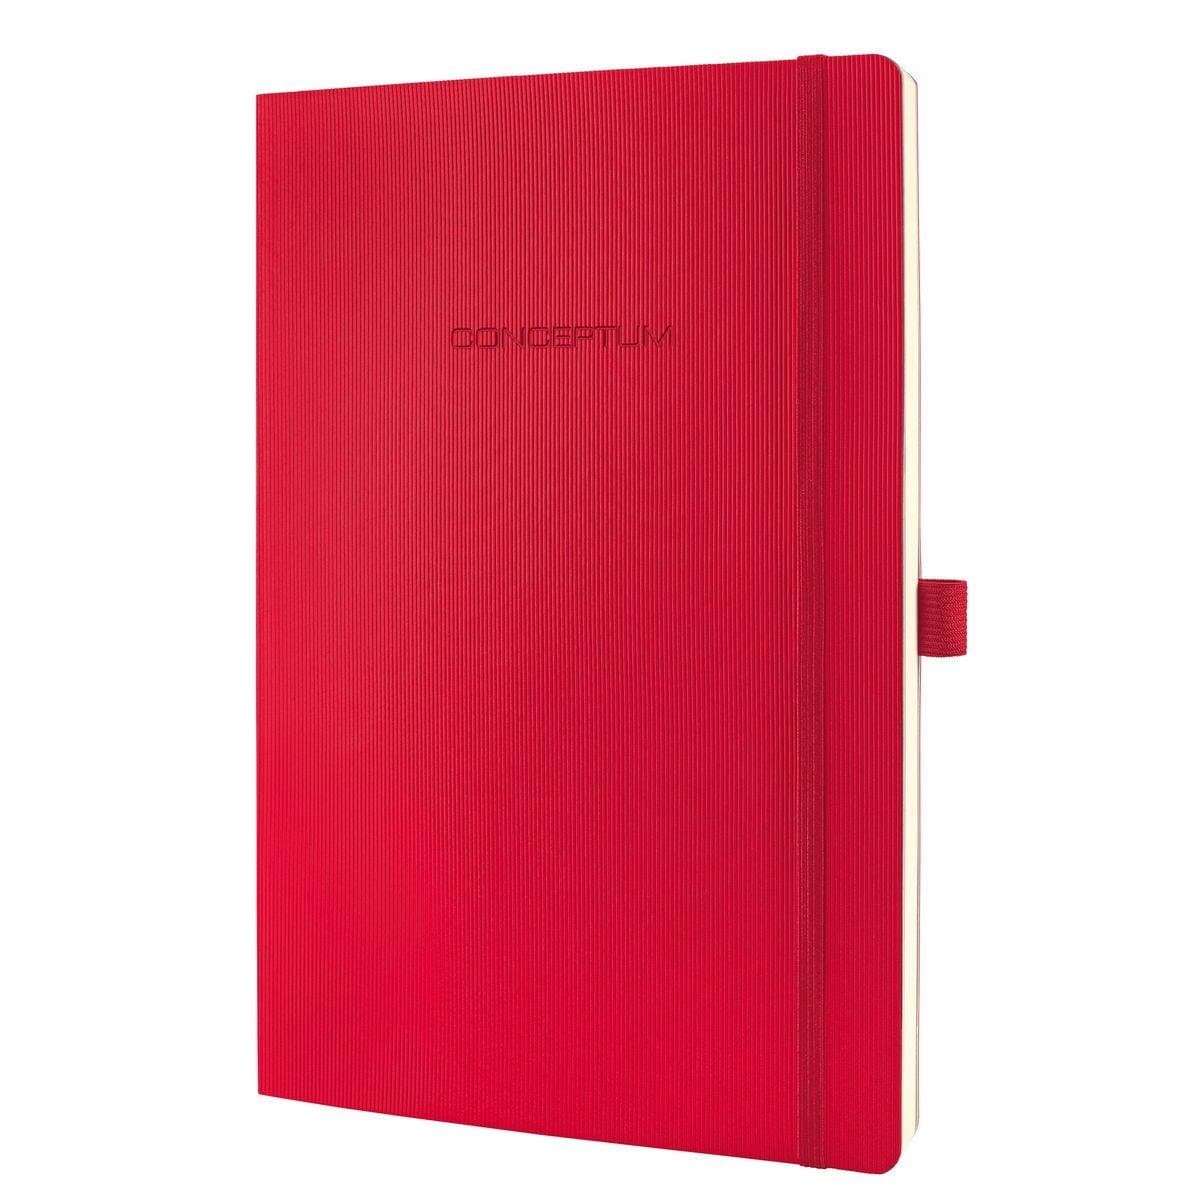 Sigel Notebook CONCEPTUM A4, Softcover, Lined, Red